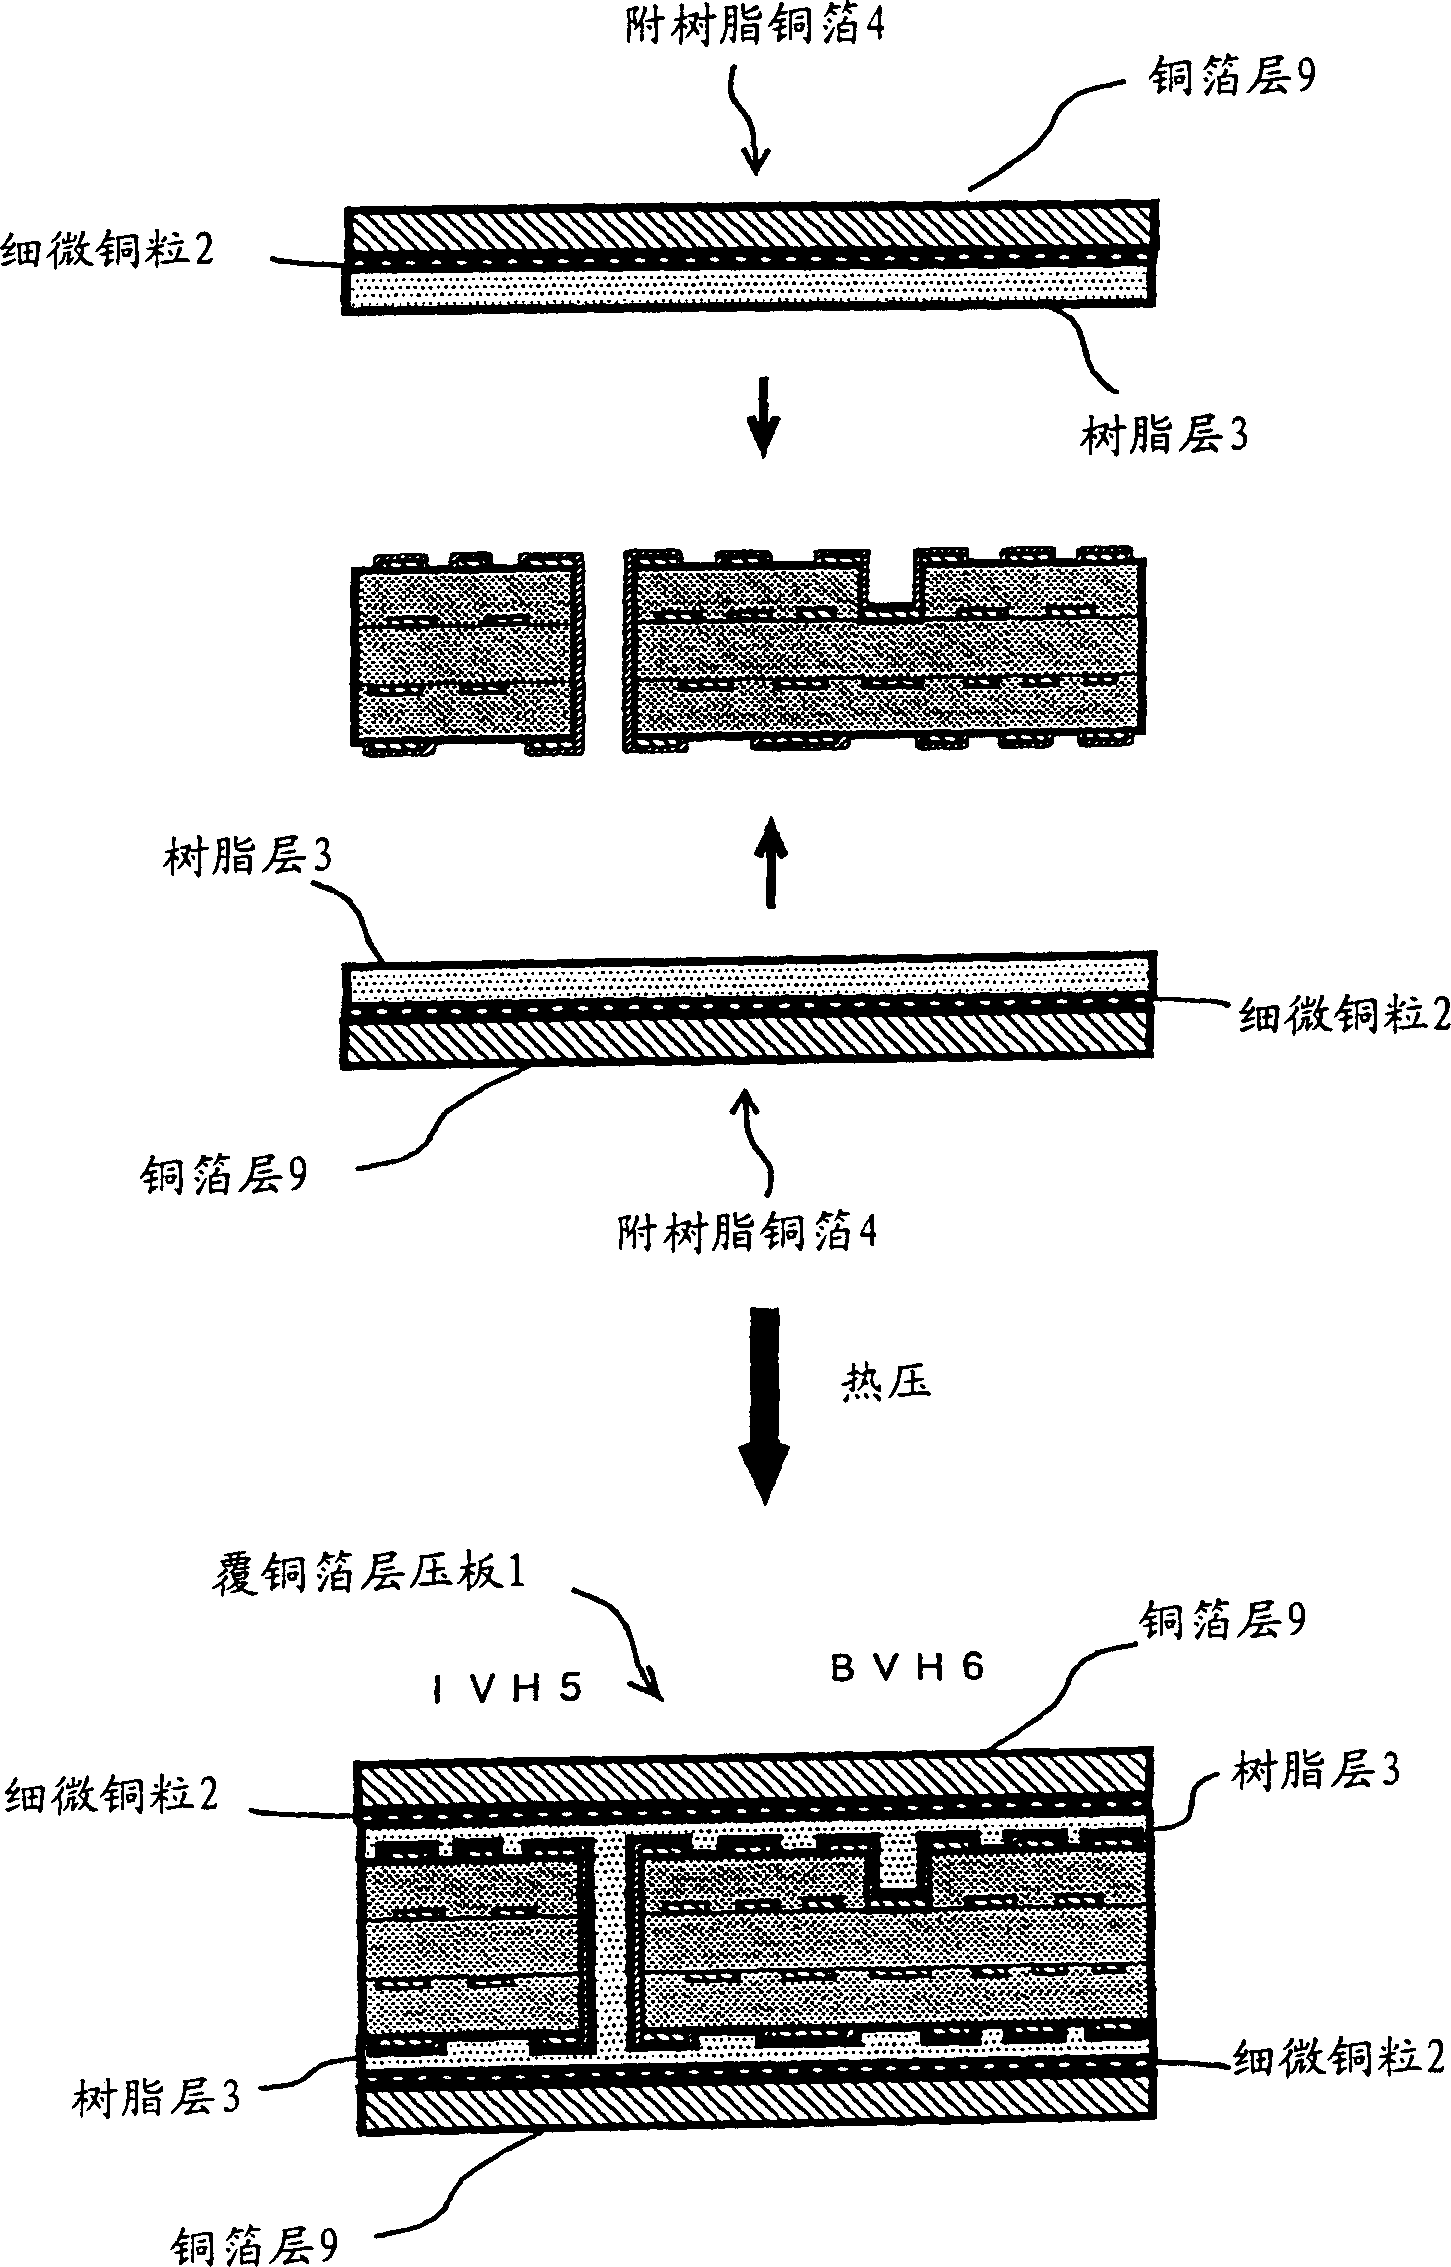 Production method for copper-clad laminated sheet